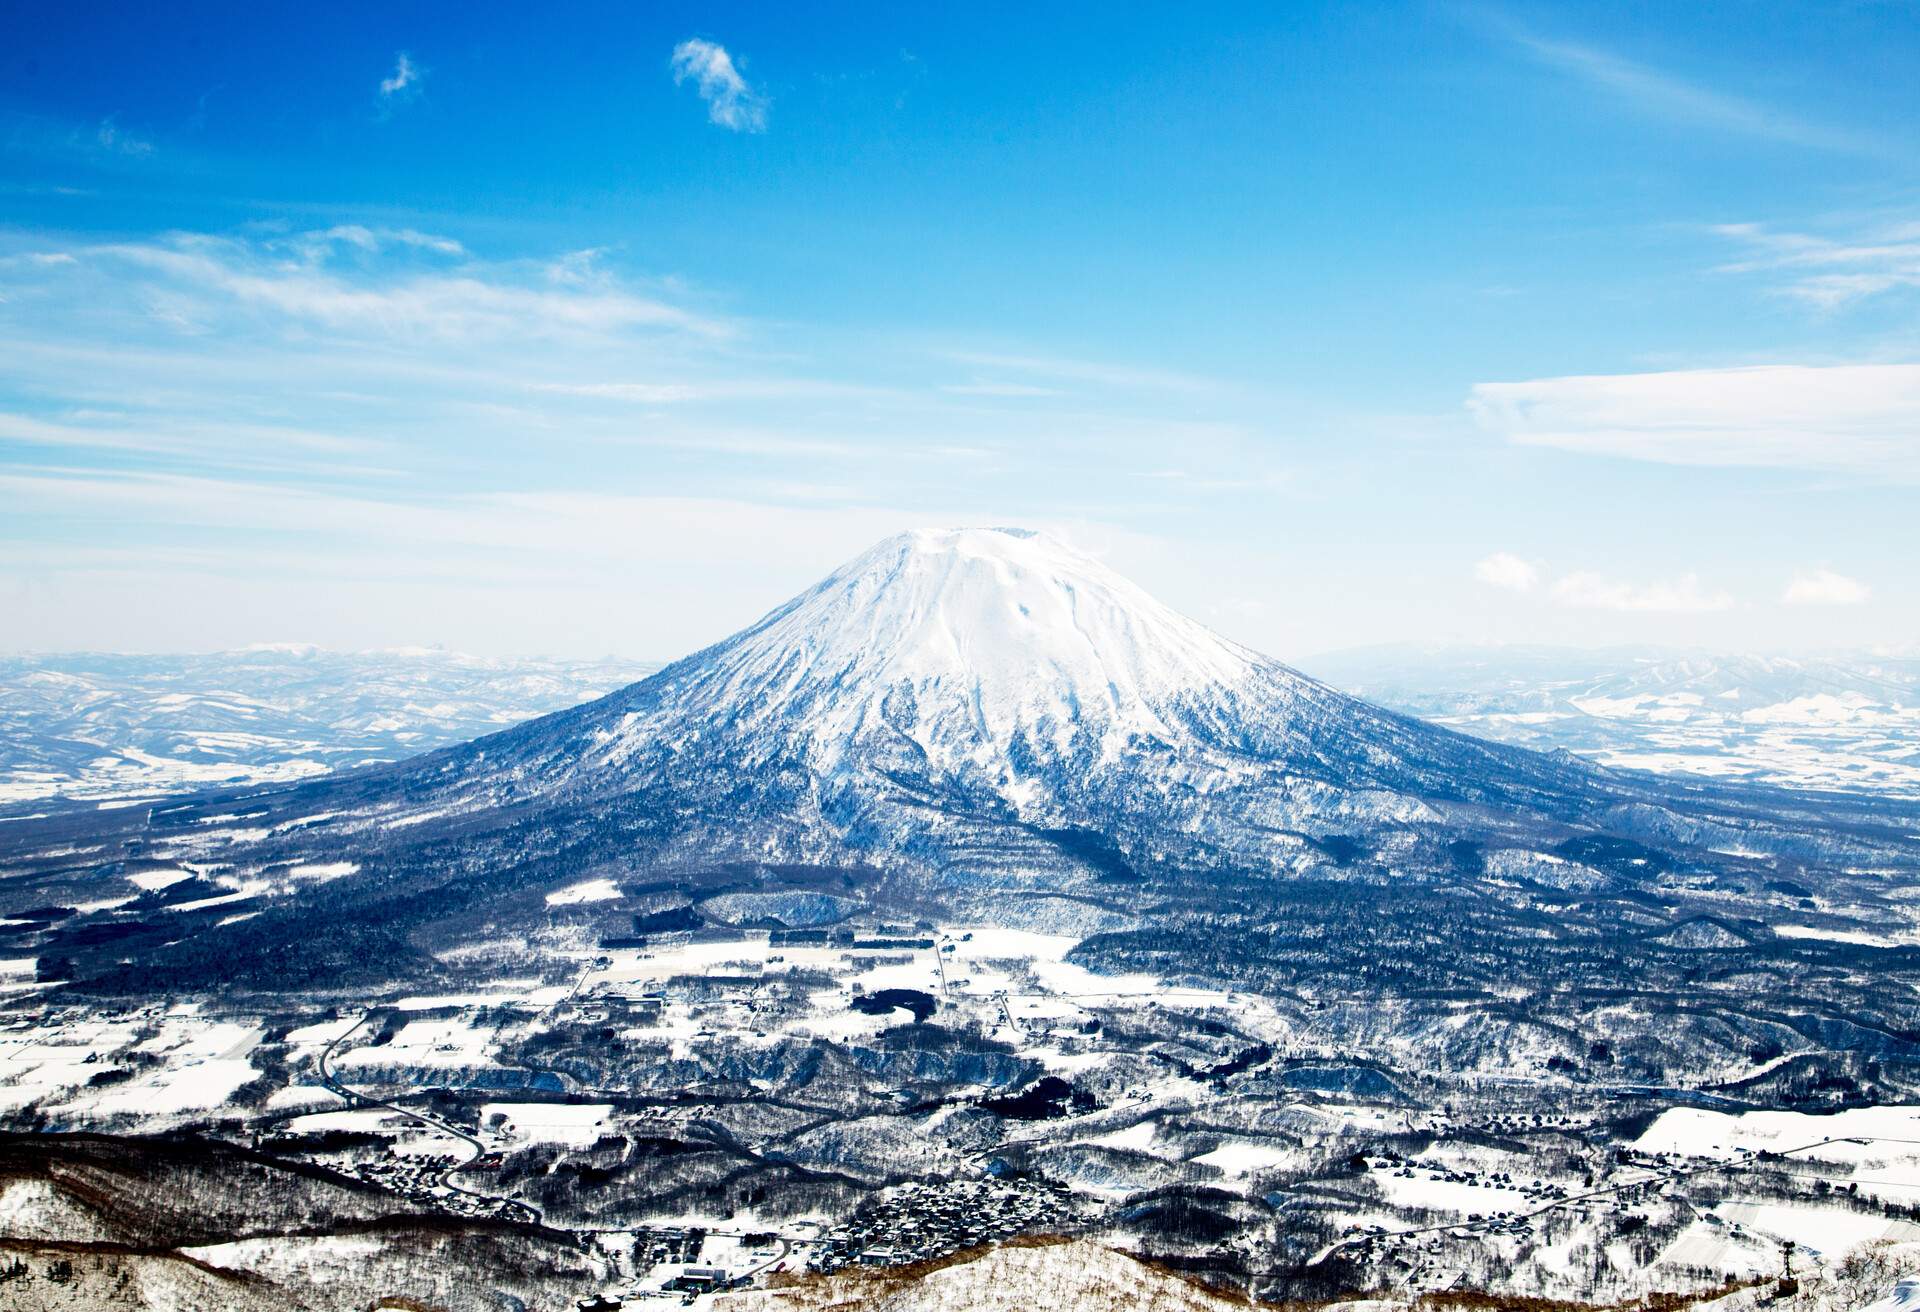 The almost perfect cone-shaped active stratovolcanic landscape is covered with snow.